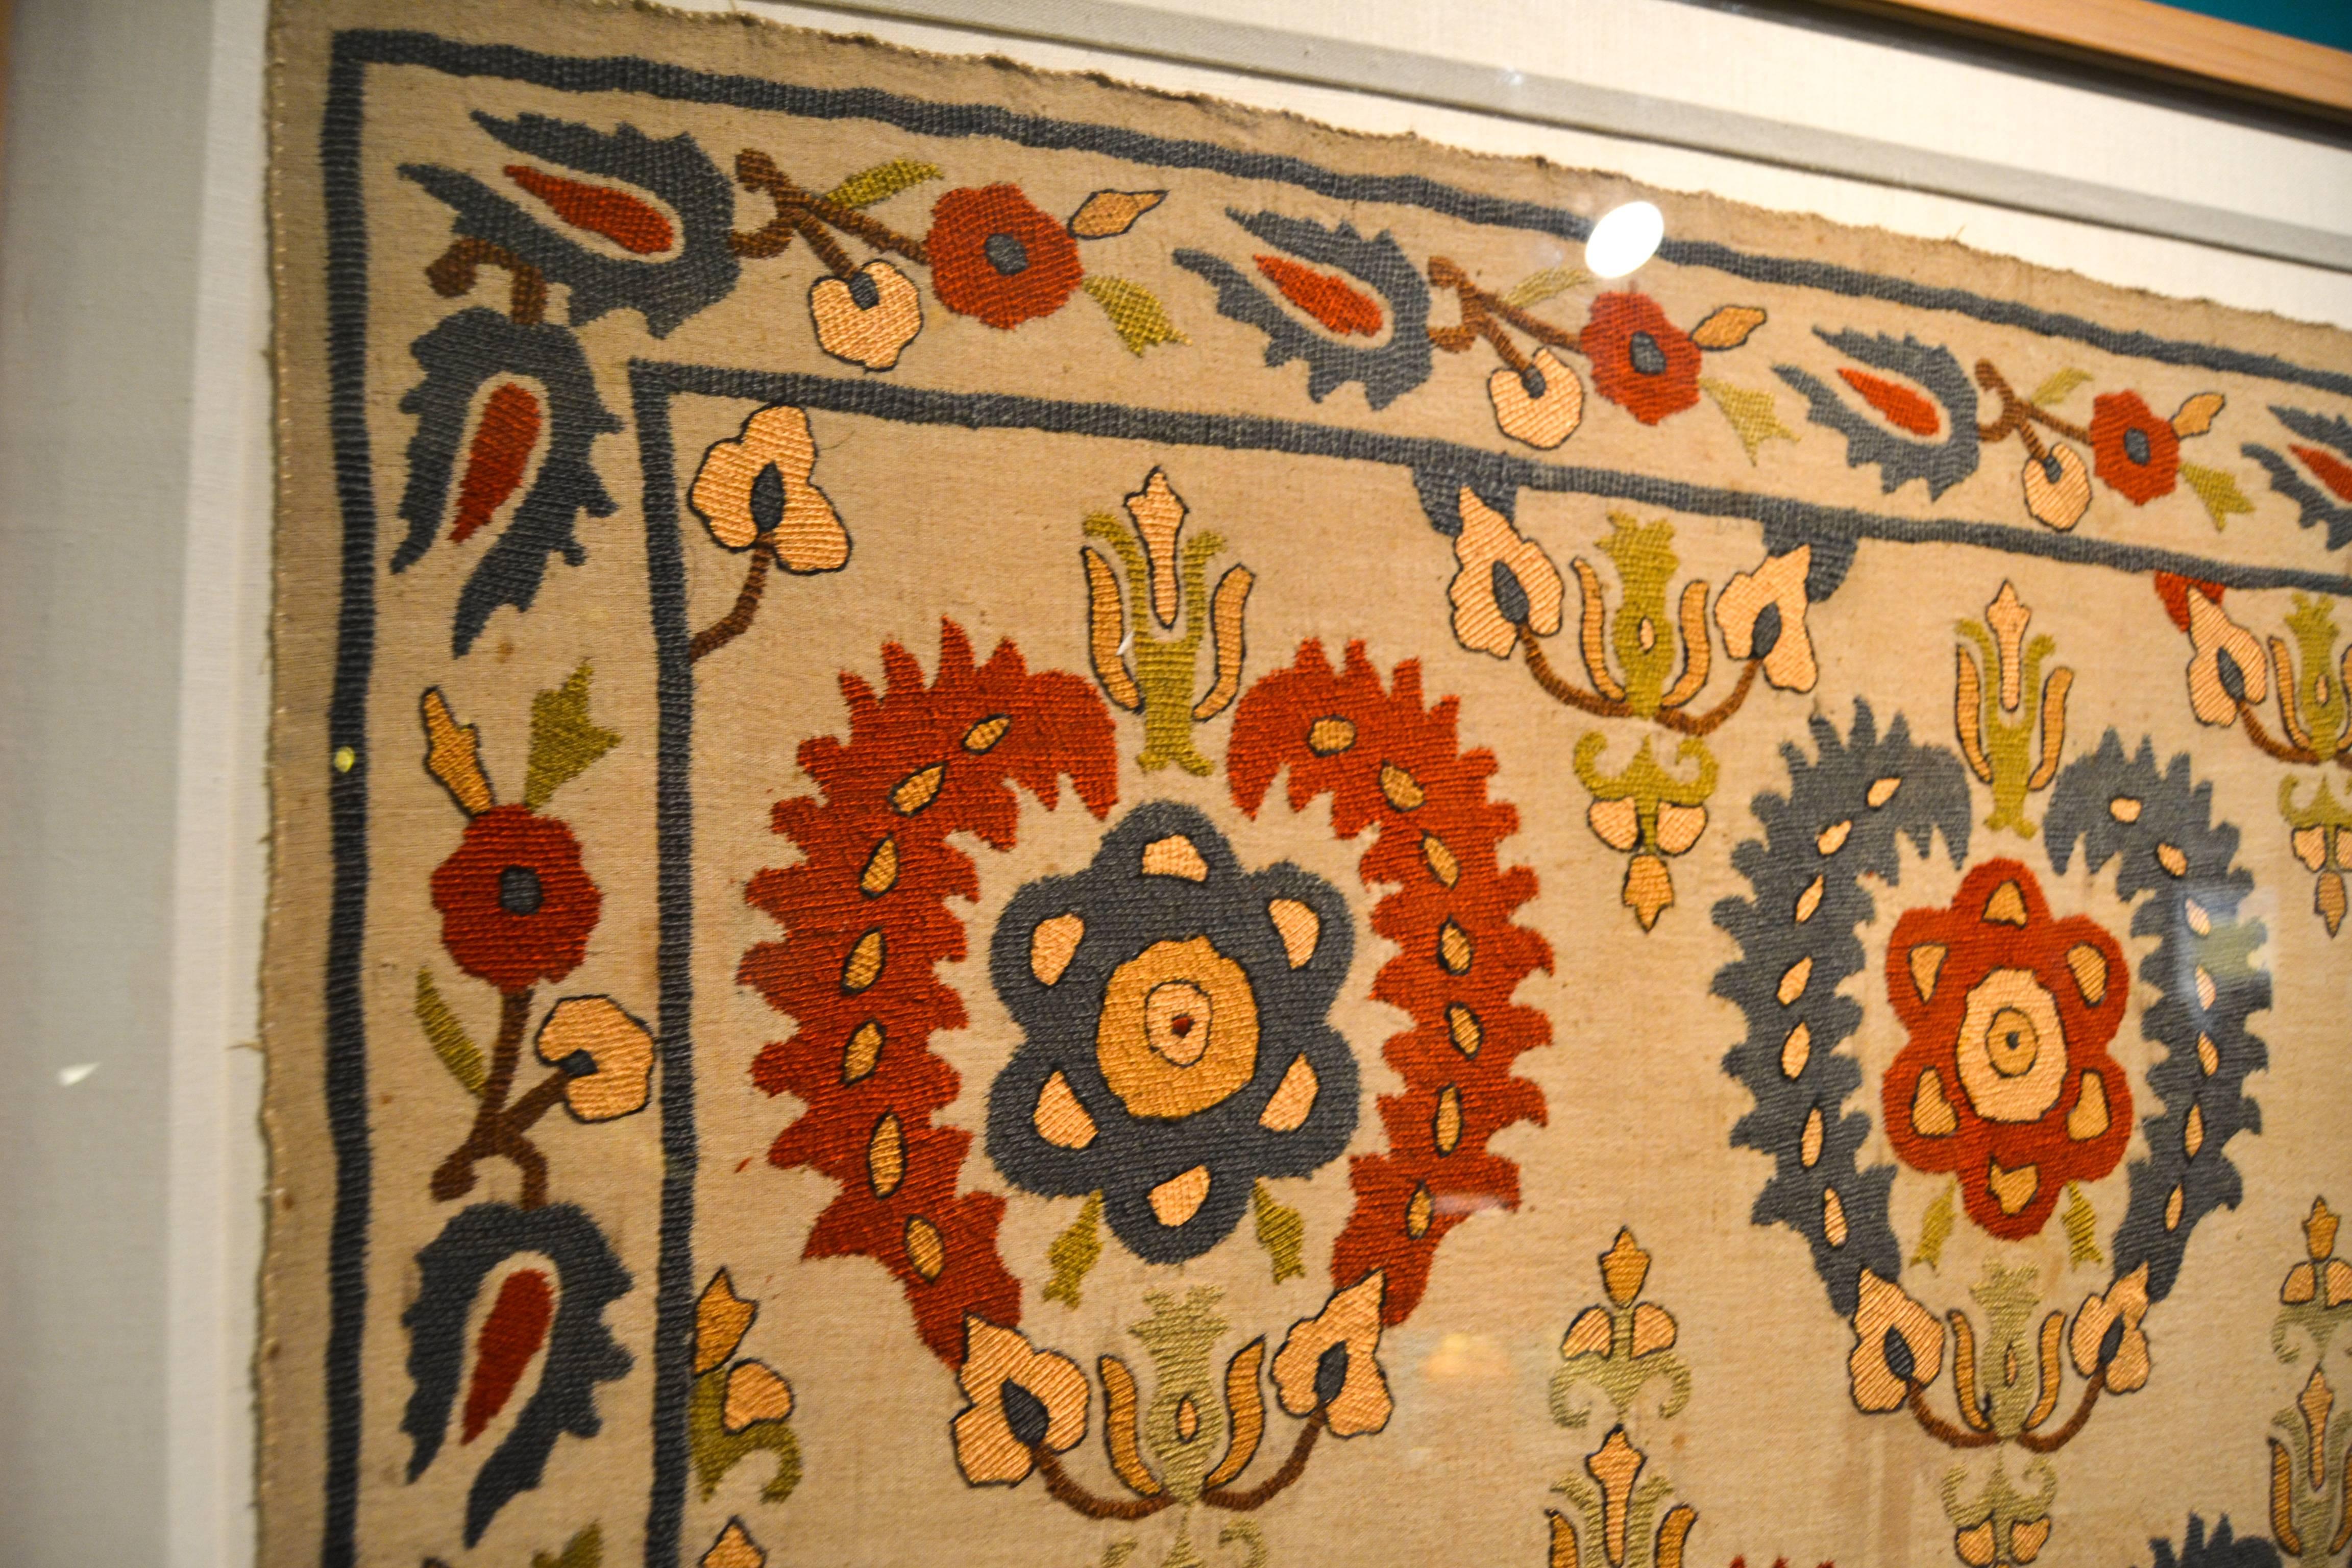 early 19th century embroidered Ottoman Bursa textile deaccessioned from a New York life insurance company's collection. Professionally mounted and framed in plexiglass. Areas of discoloration and one nickel sized hole in bottom half. Moderate